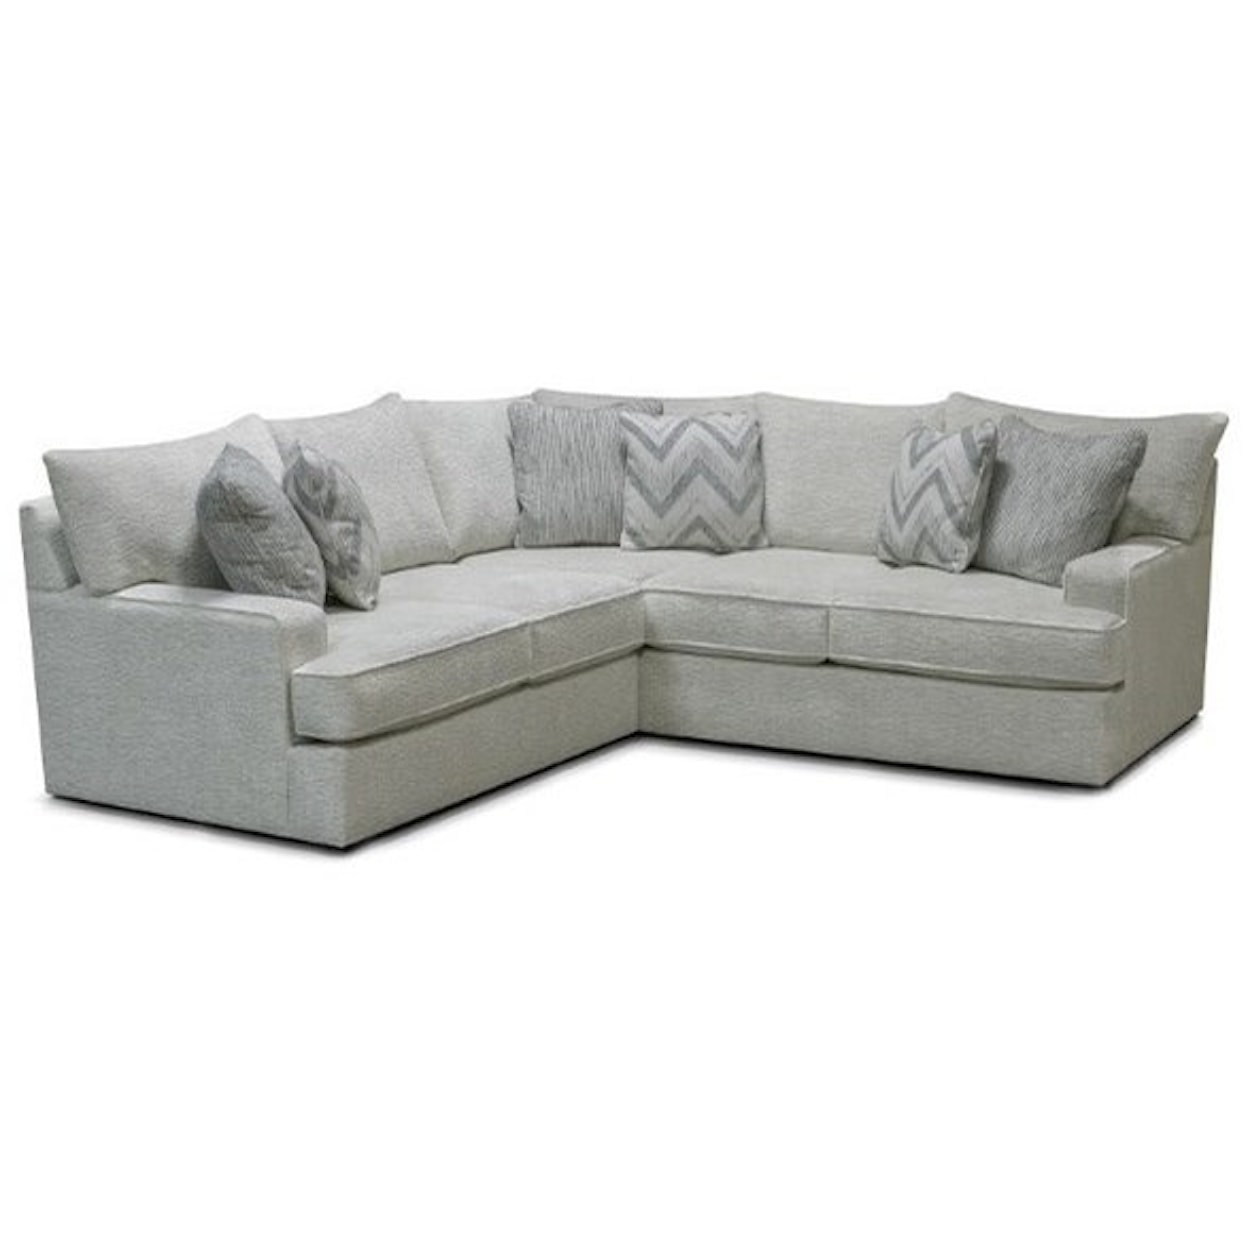 England 3300 Series Right-Facing 2-Piece Sectional